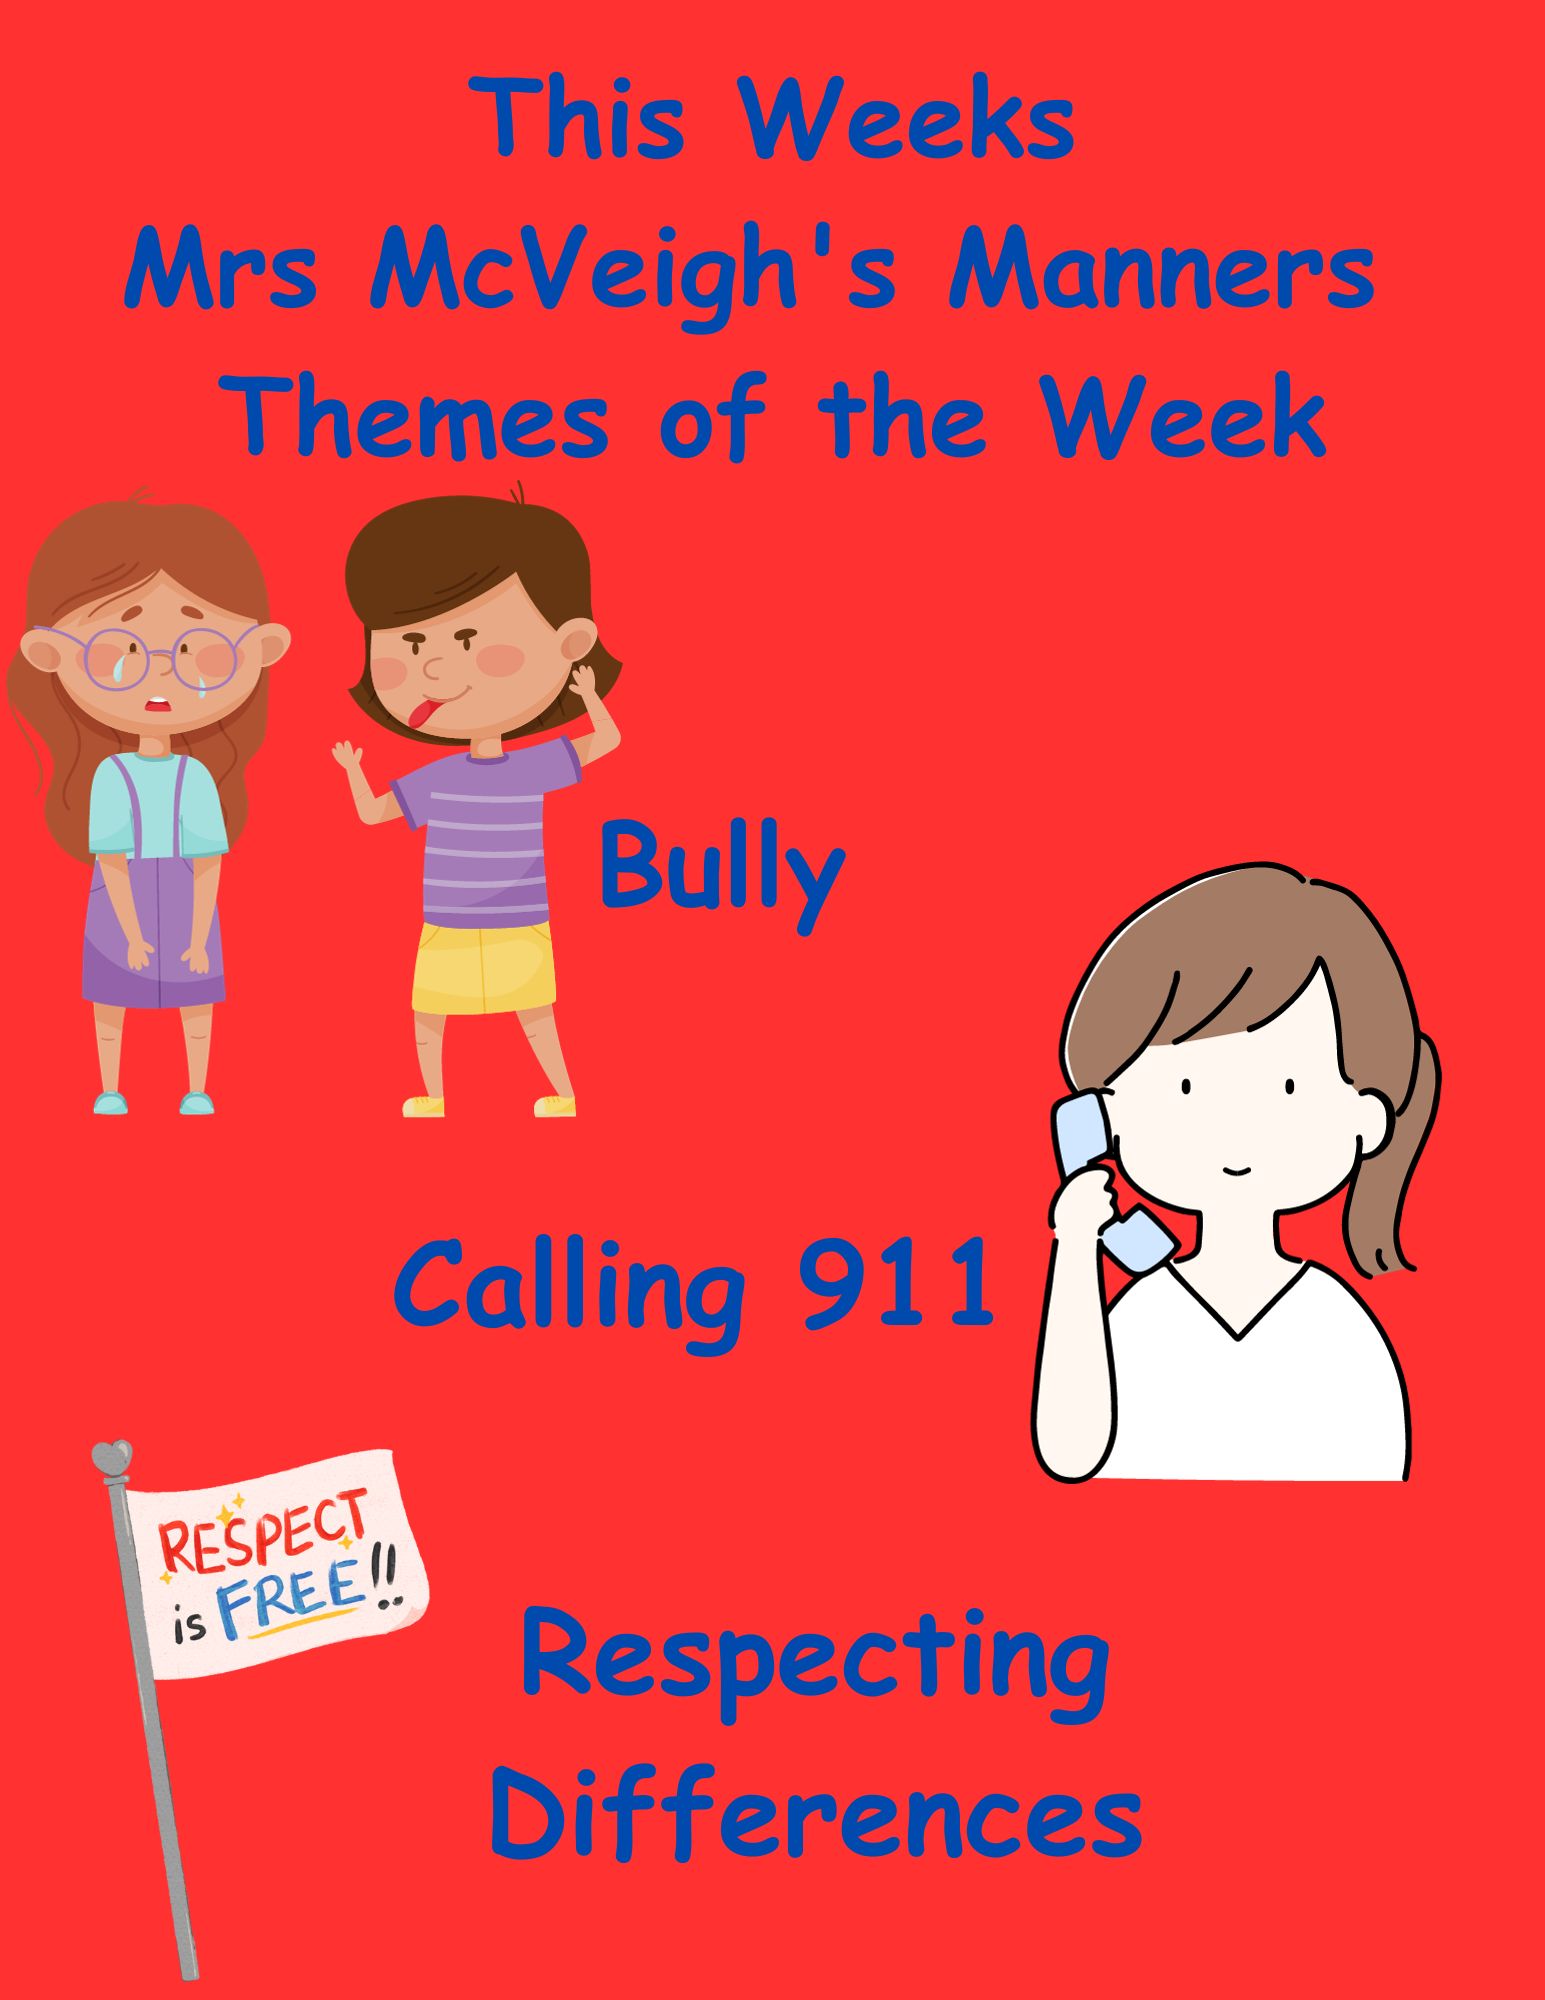 Bullies, Calling 911, and Respecting Differences – Themes of the Week